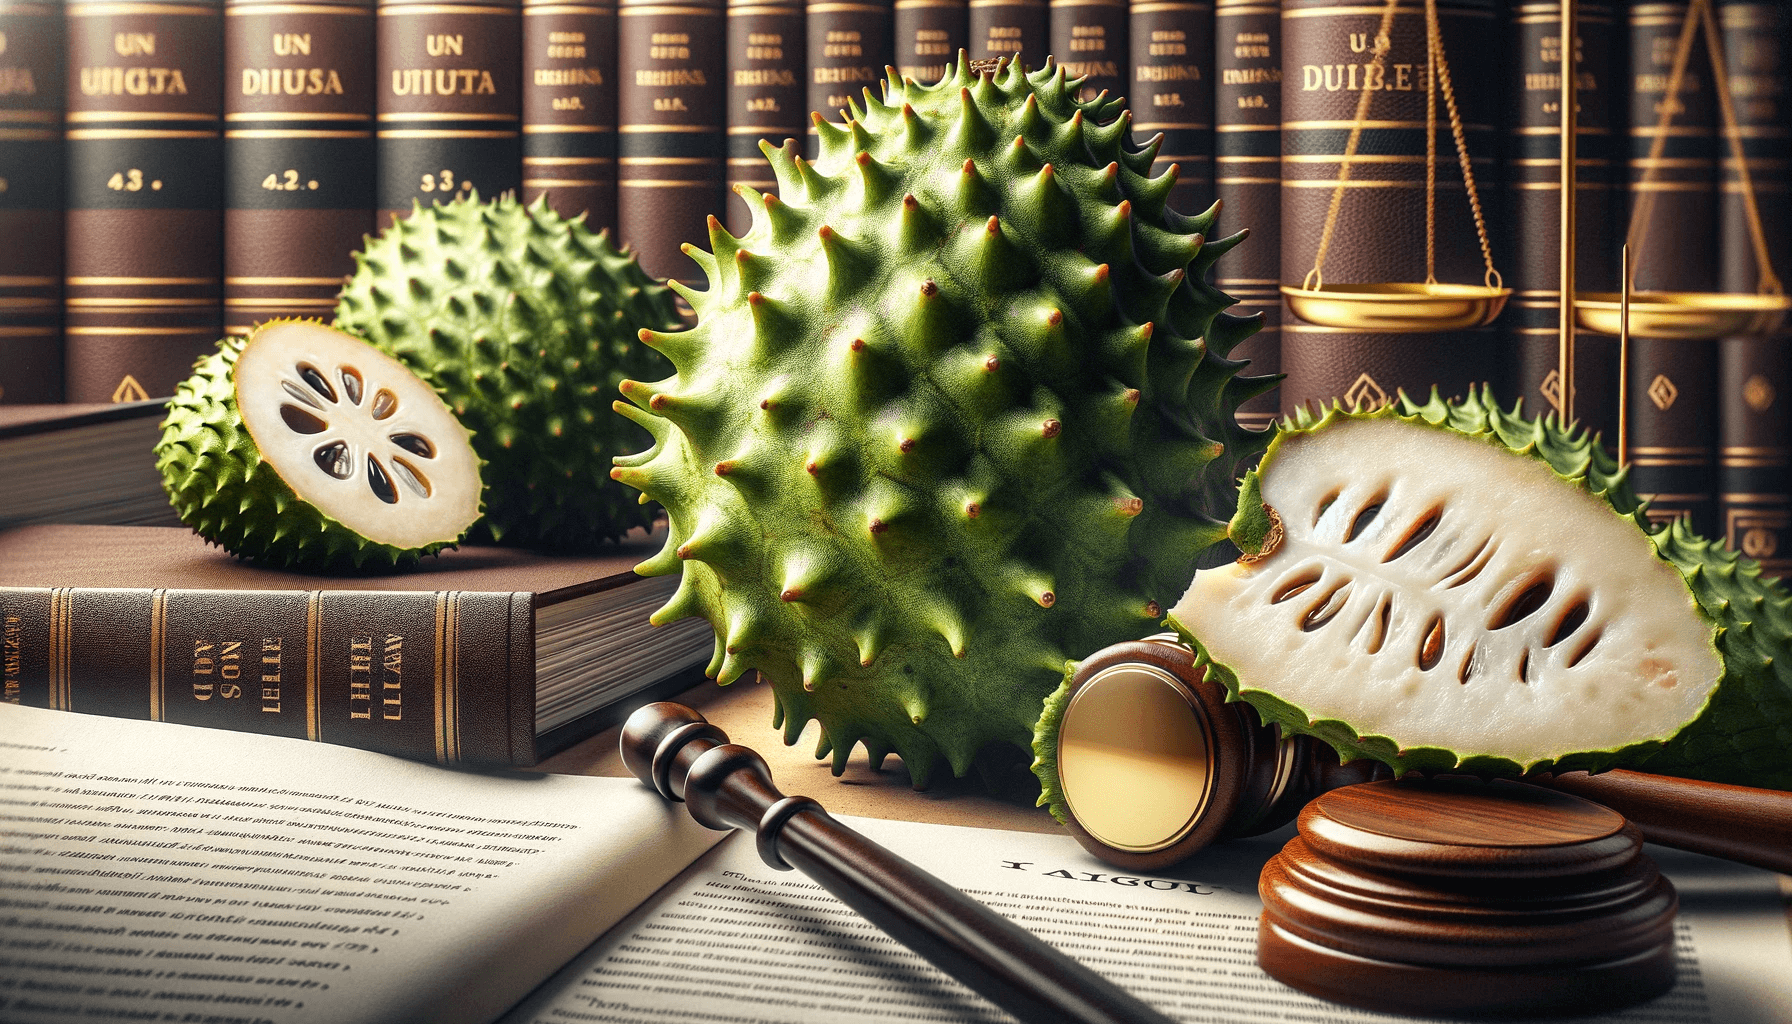 Why is soursop illegal in the U.S?